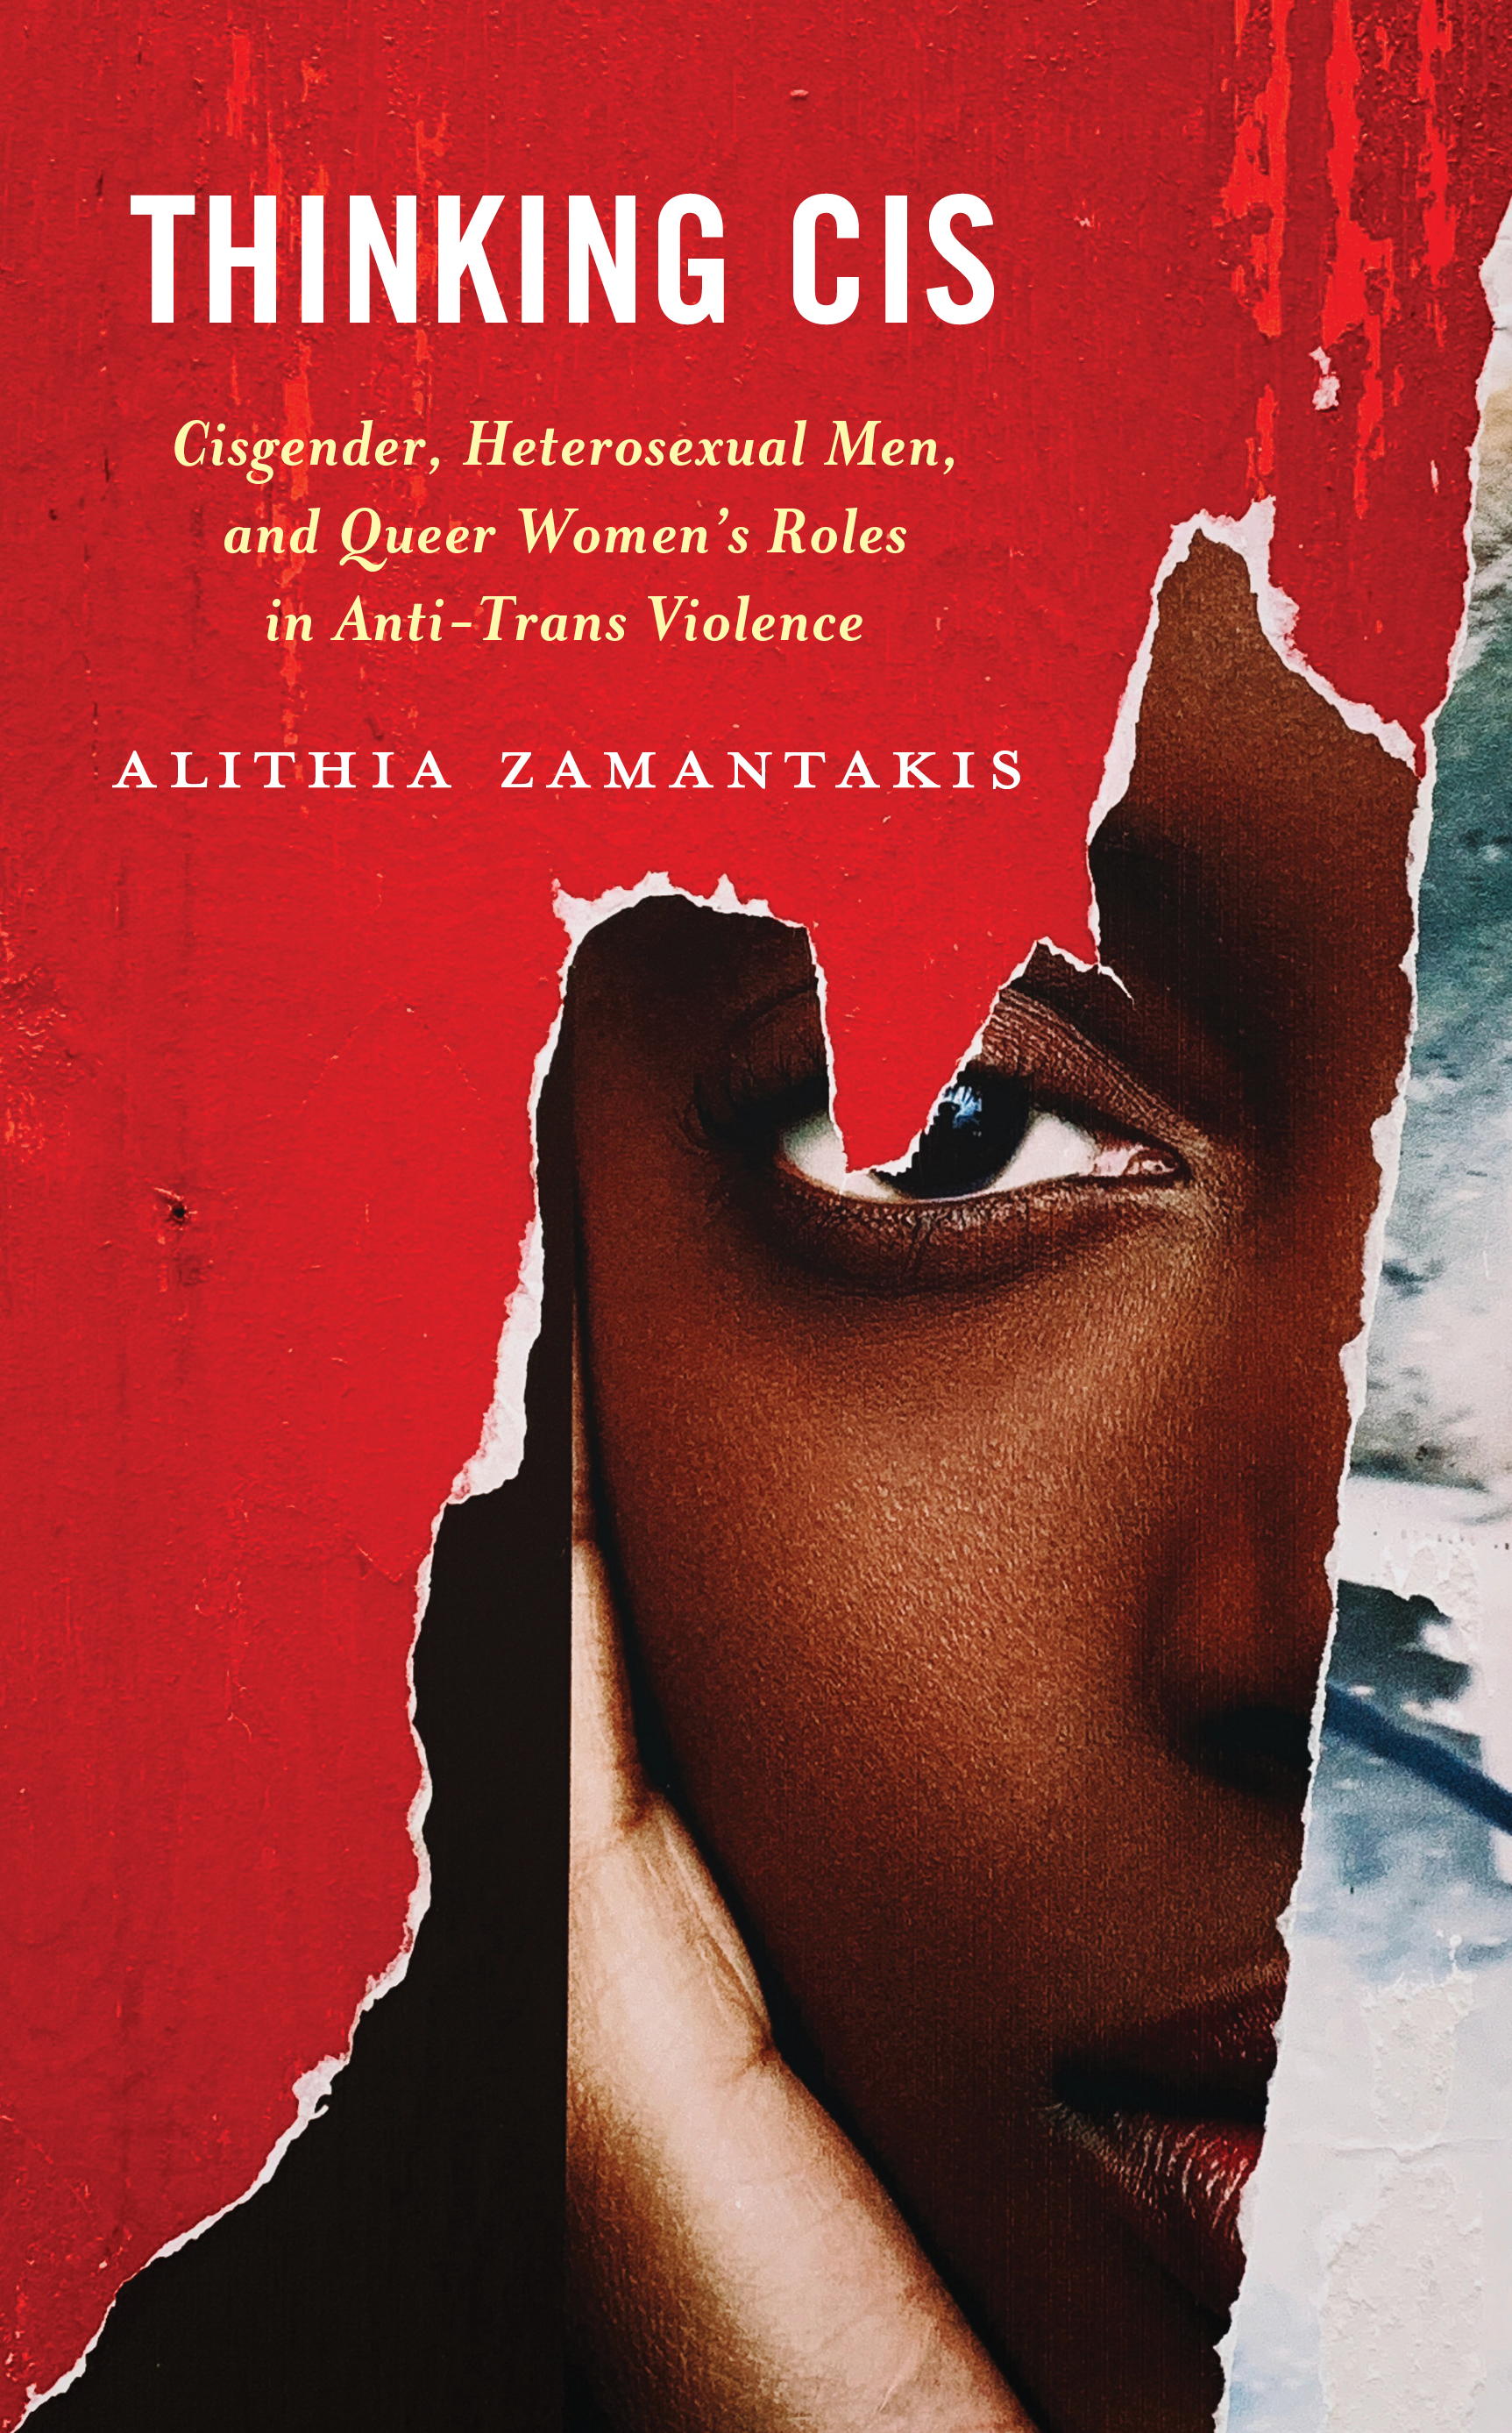 Thinking Cis: Cisgender, Heterosexual Men, and Queer Women's Roles in Anti-Trans Violence